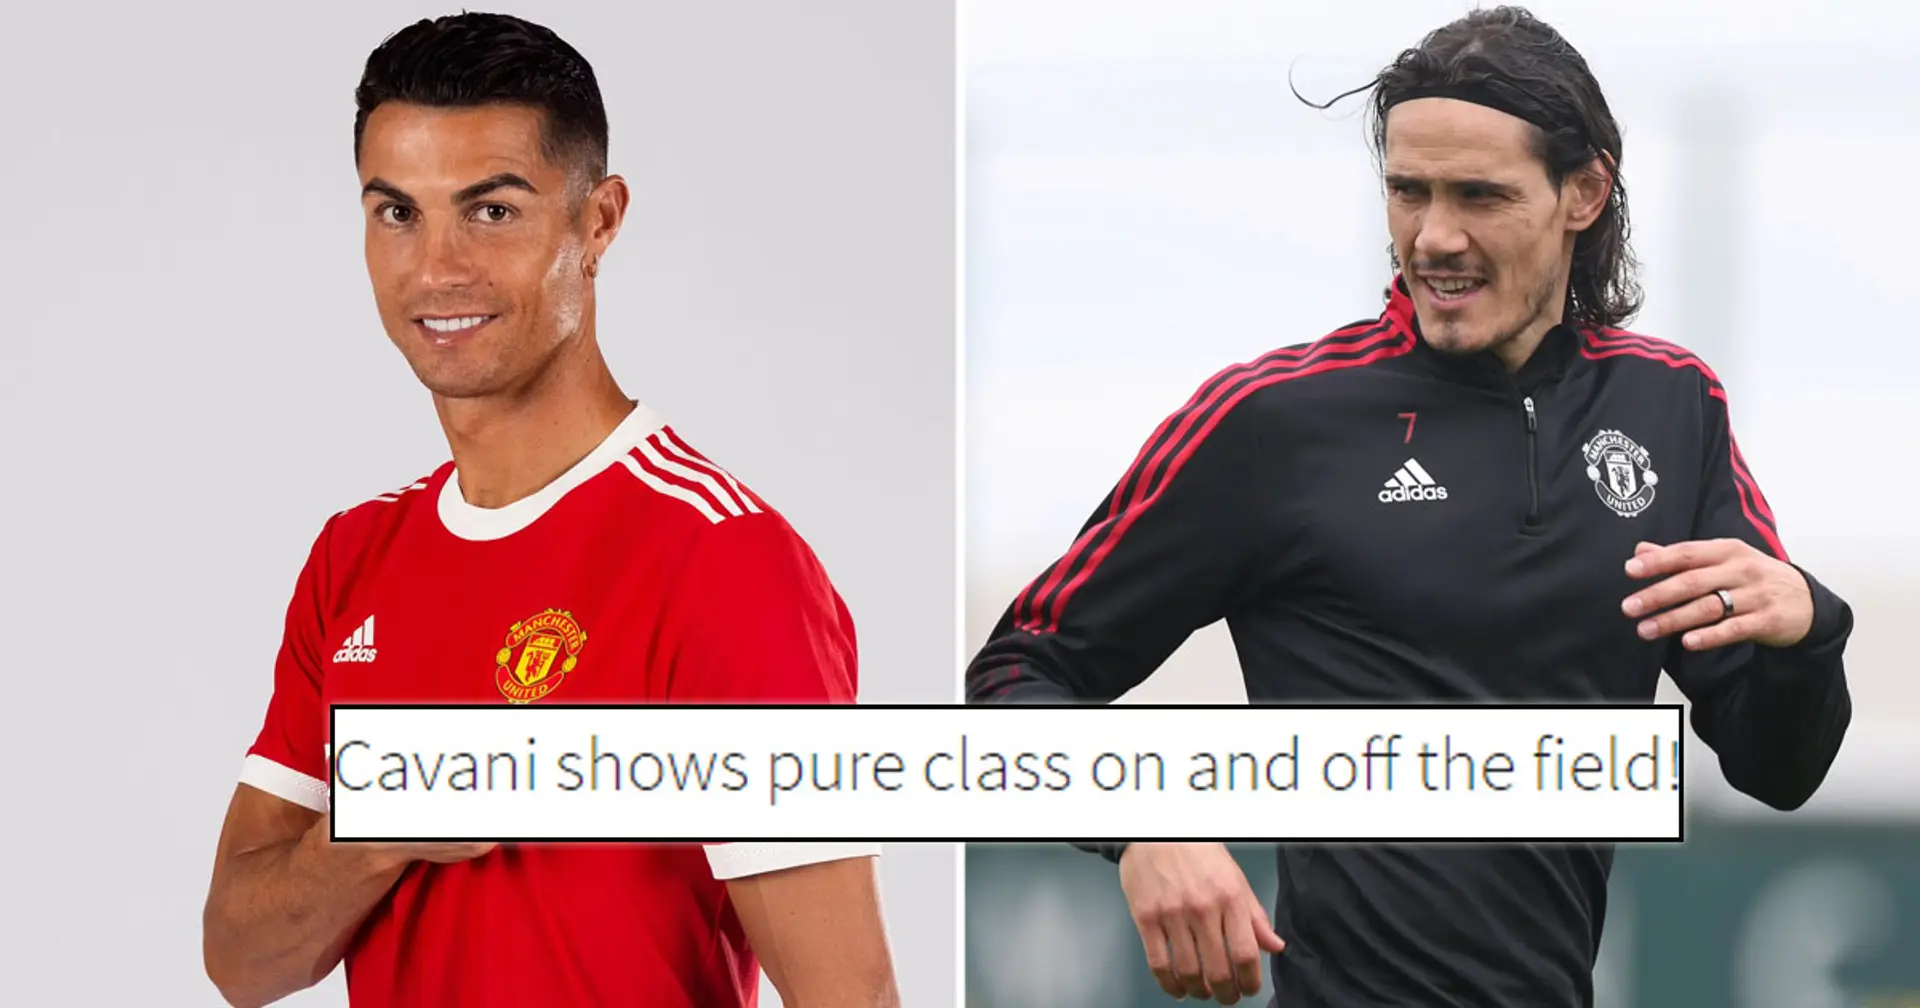 'He's a man of honour, 'Pure class on and off the field': United fans laud Cavani for giving up no.7 to Ronaldo